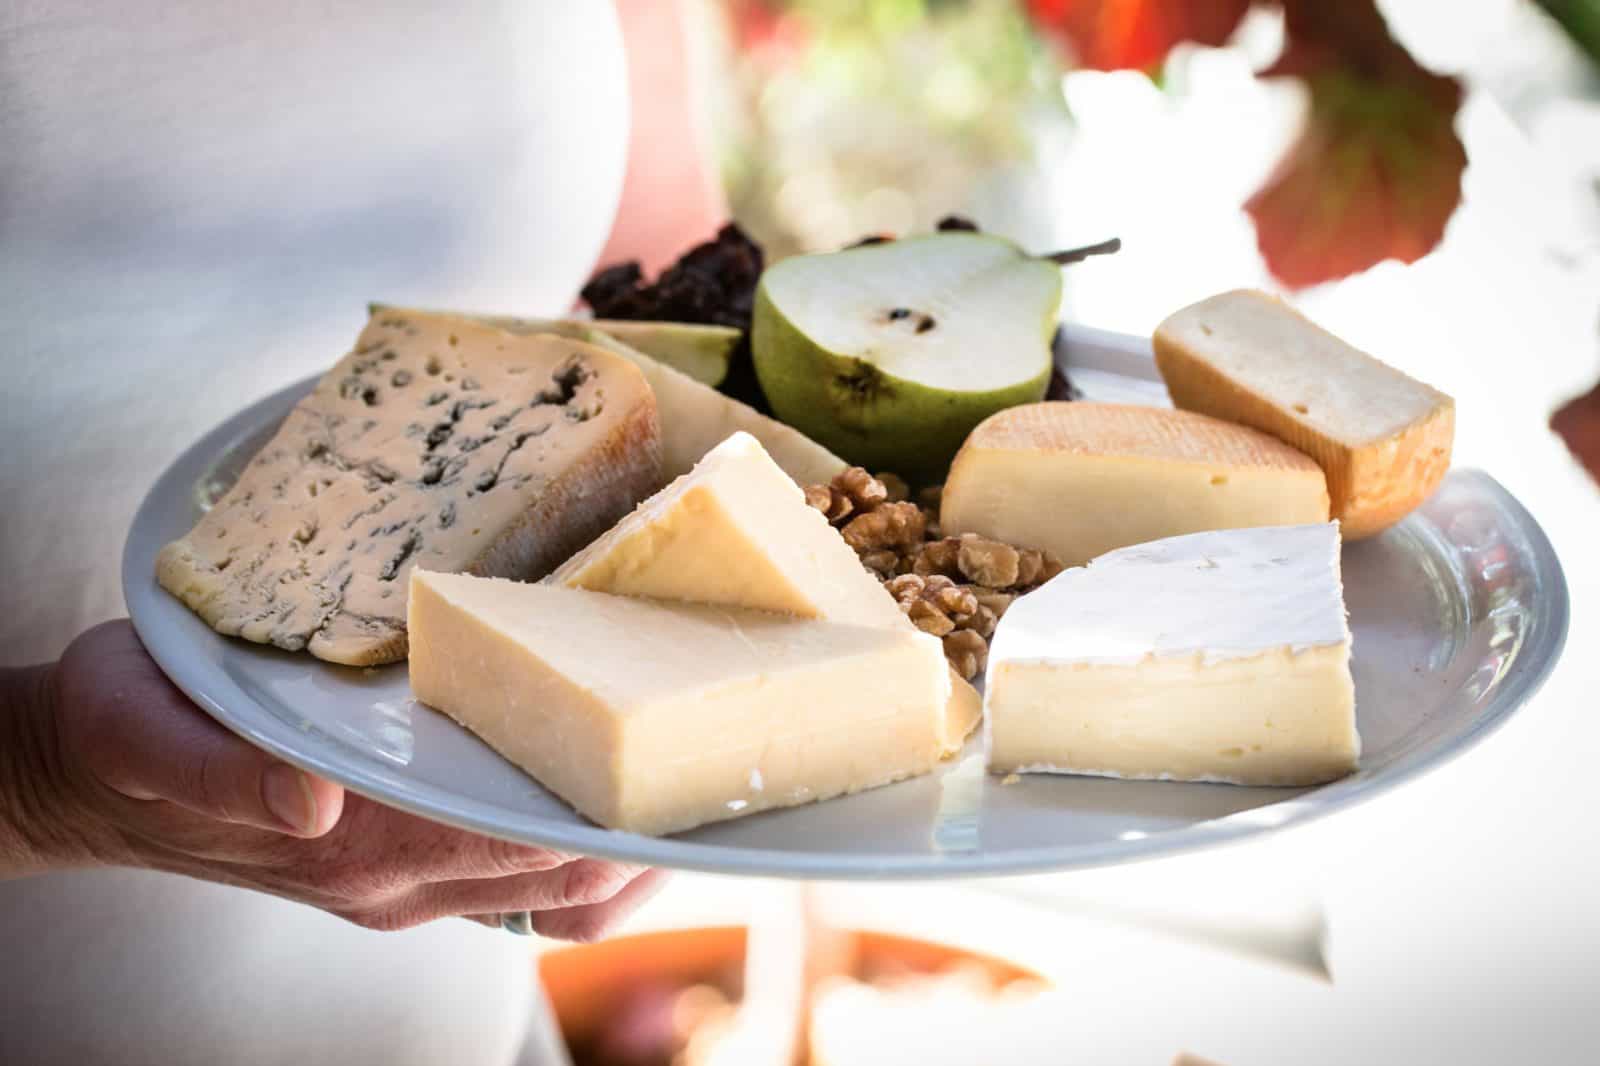 Cheese platter of farmhouse cheeses from the Milawa factory